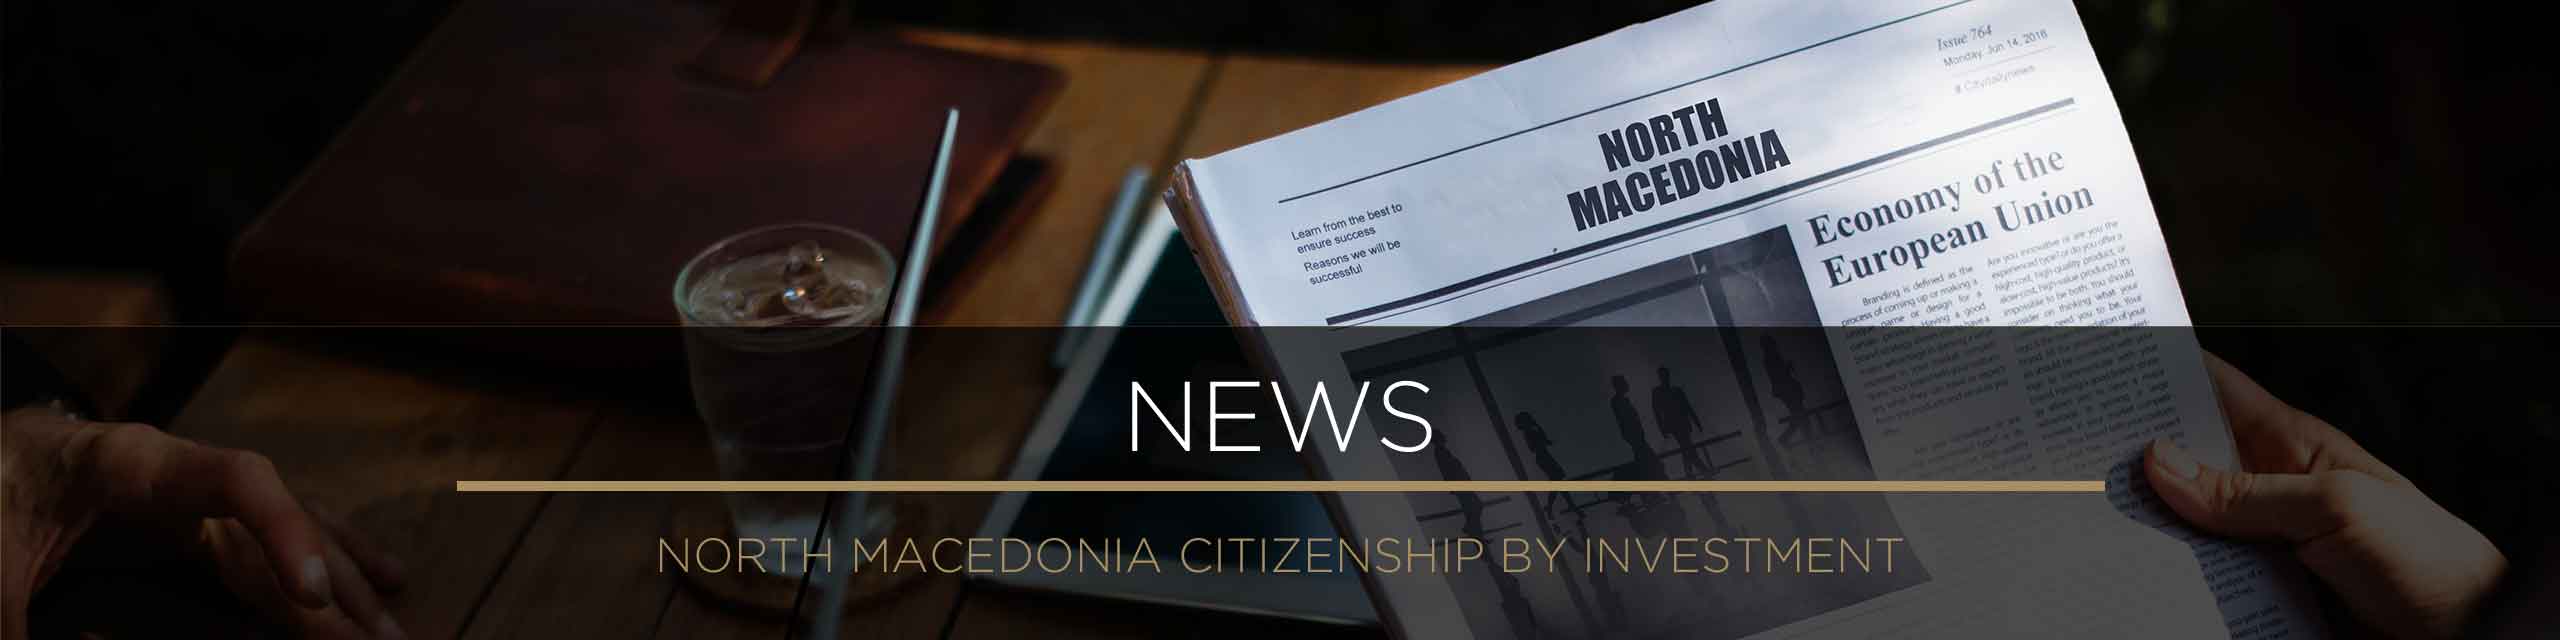 News and press articles on the North Macedonian citizenship program